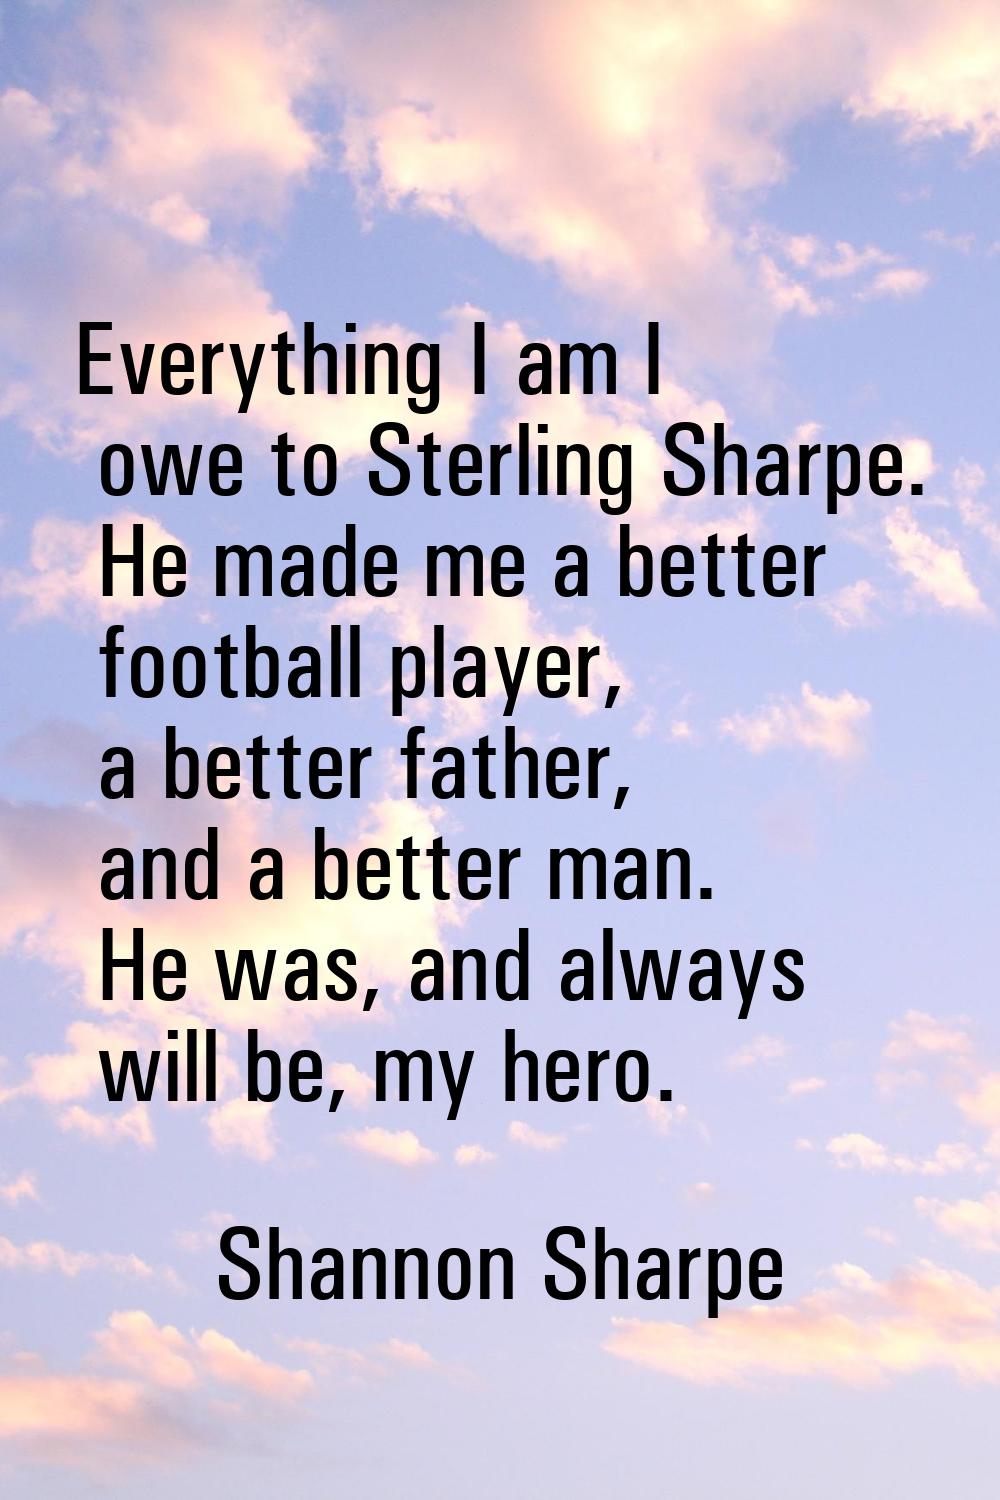 Everything I am I owe to Sterling Sharpe. He made me a better football player, a better father, and